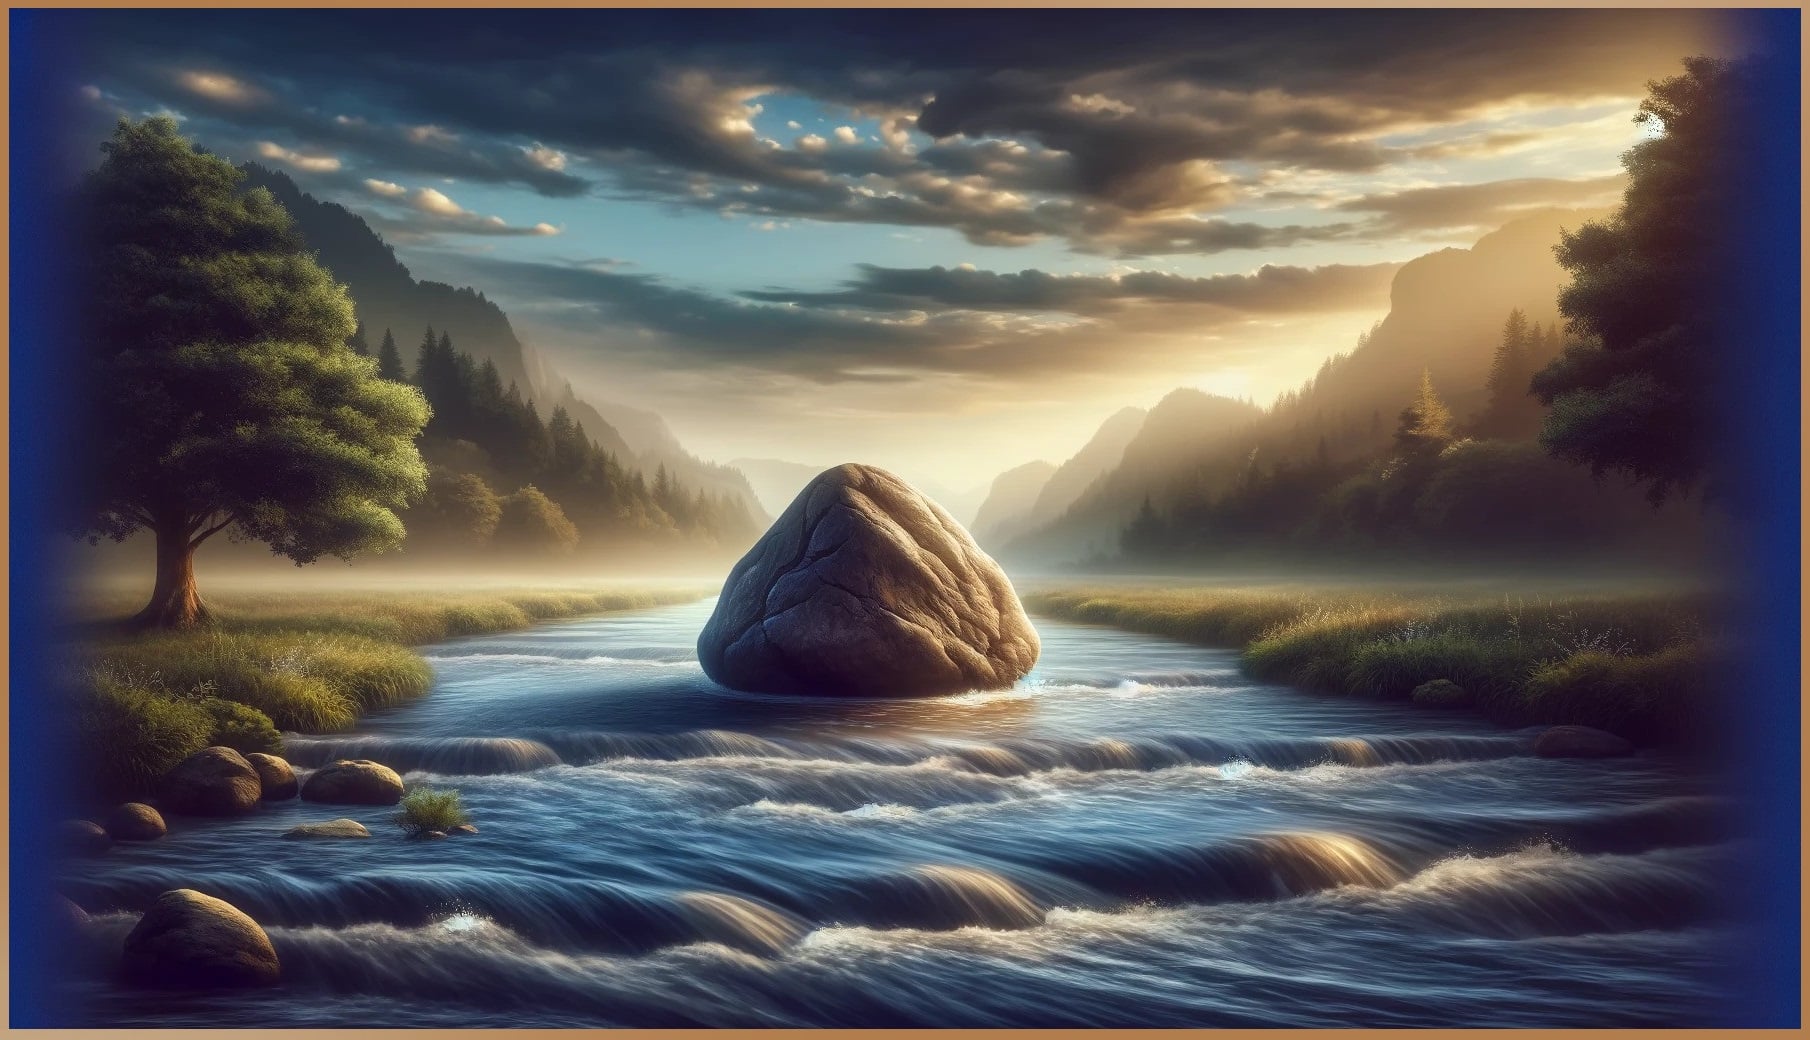 A large rock stands resolute in the center of a flowing river, symbolizing the strength of mindfulness in protecting one's energy against the relentless currents of life's challenges.